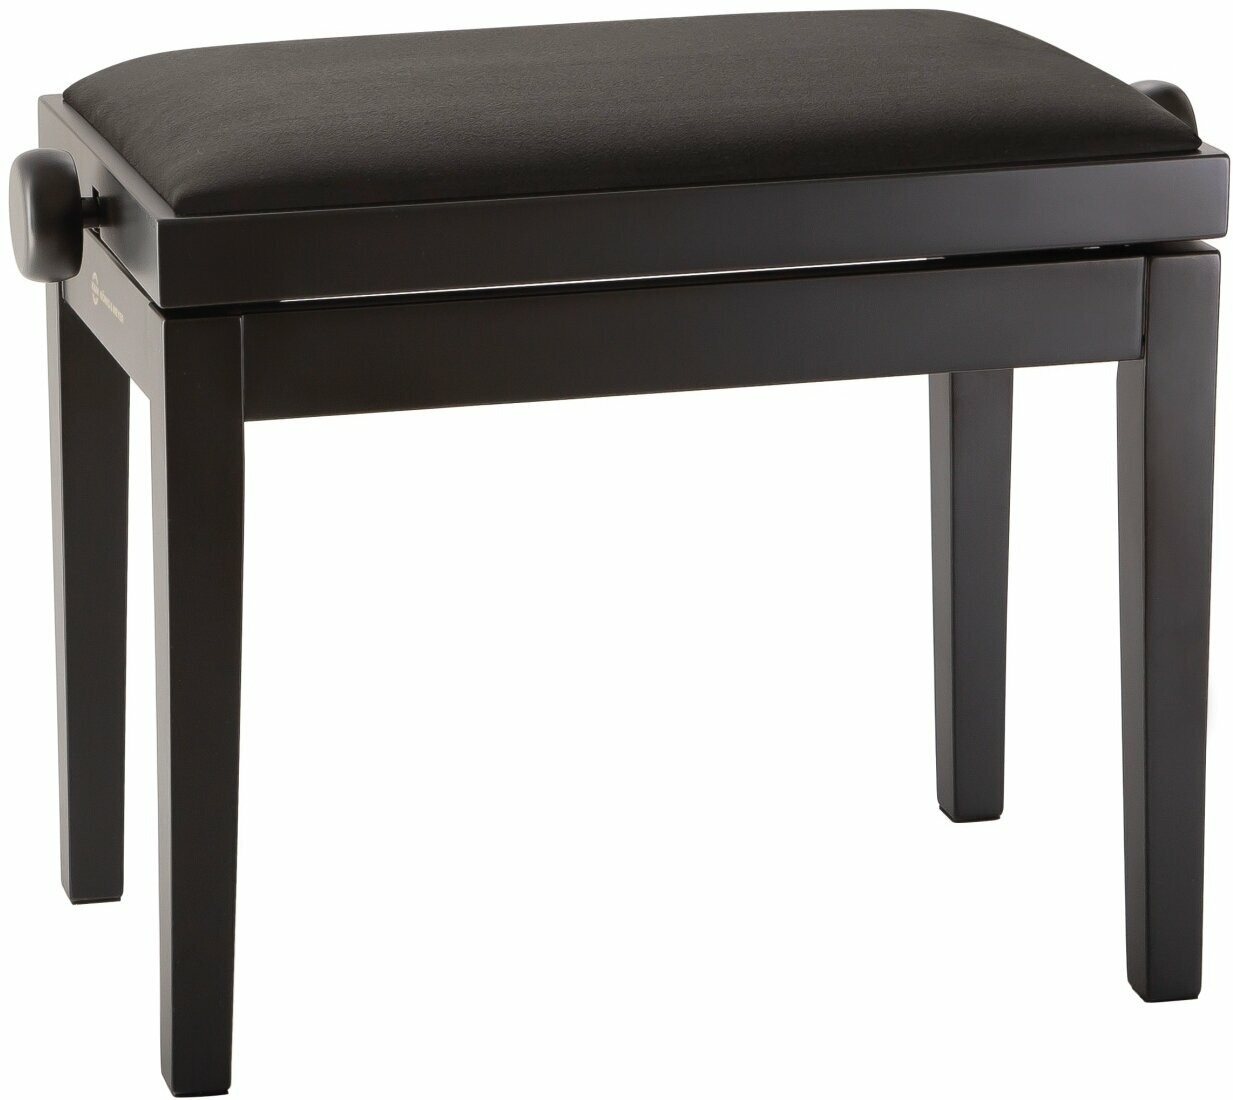 Wooden or classic piano stools
 Konig & Meyer 13960 Black